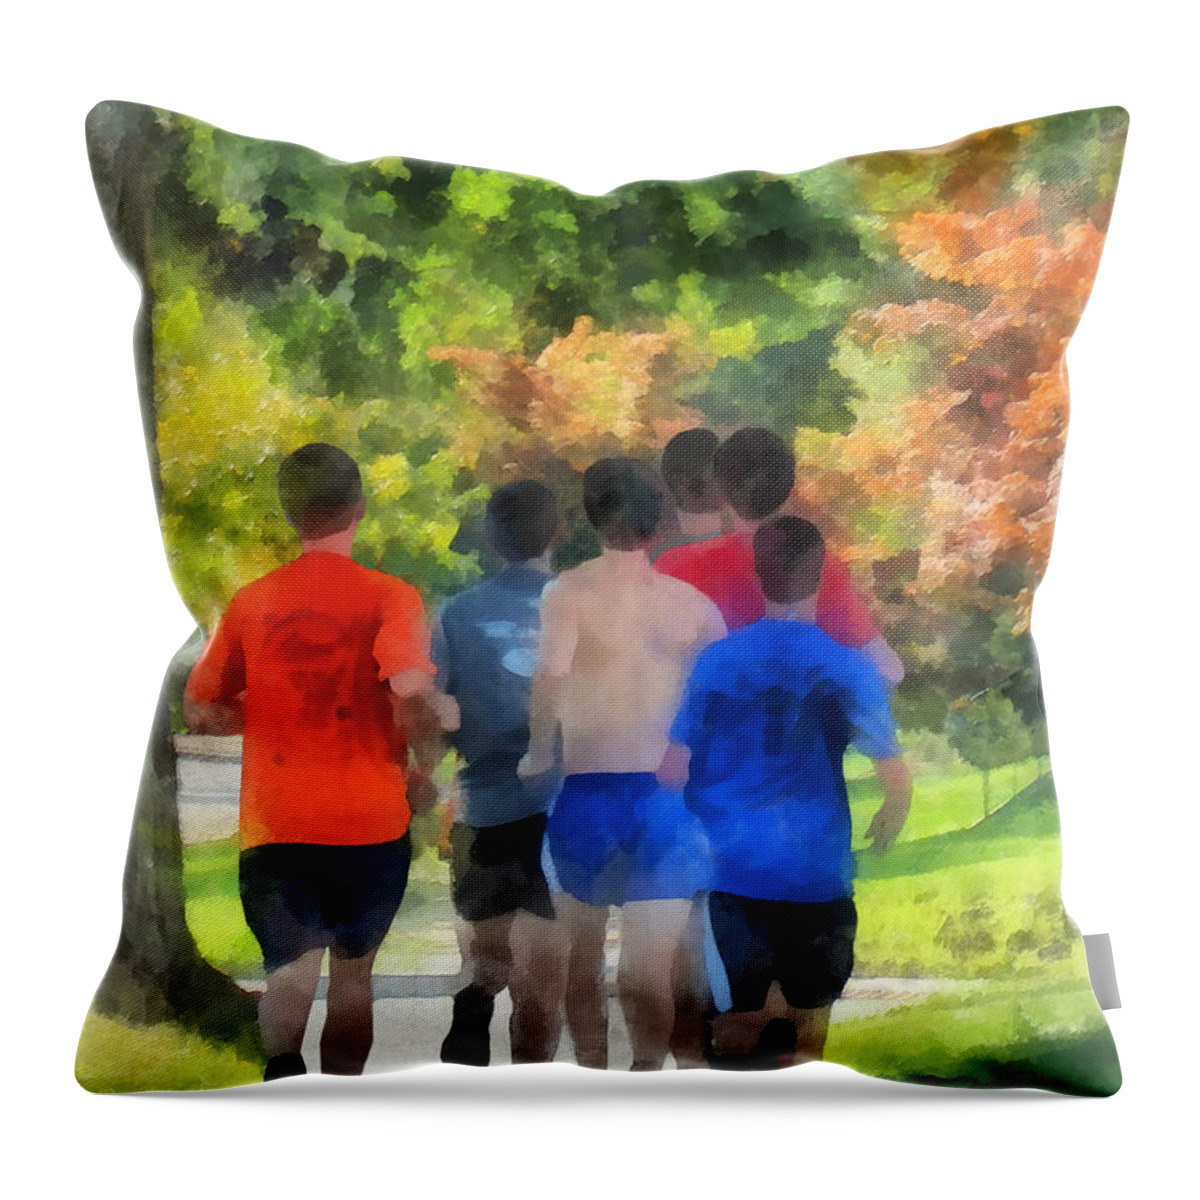 Track And Field Throw Pillow featuring the photograph Track Practice by Susan Savad